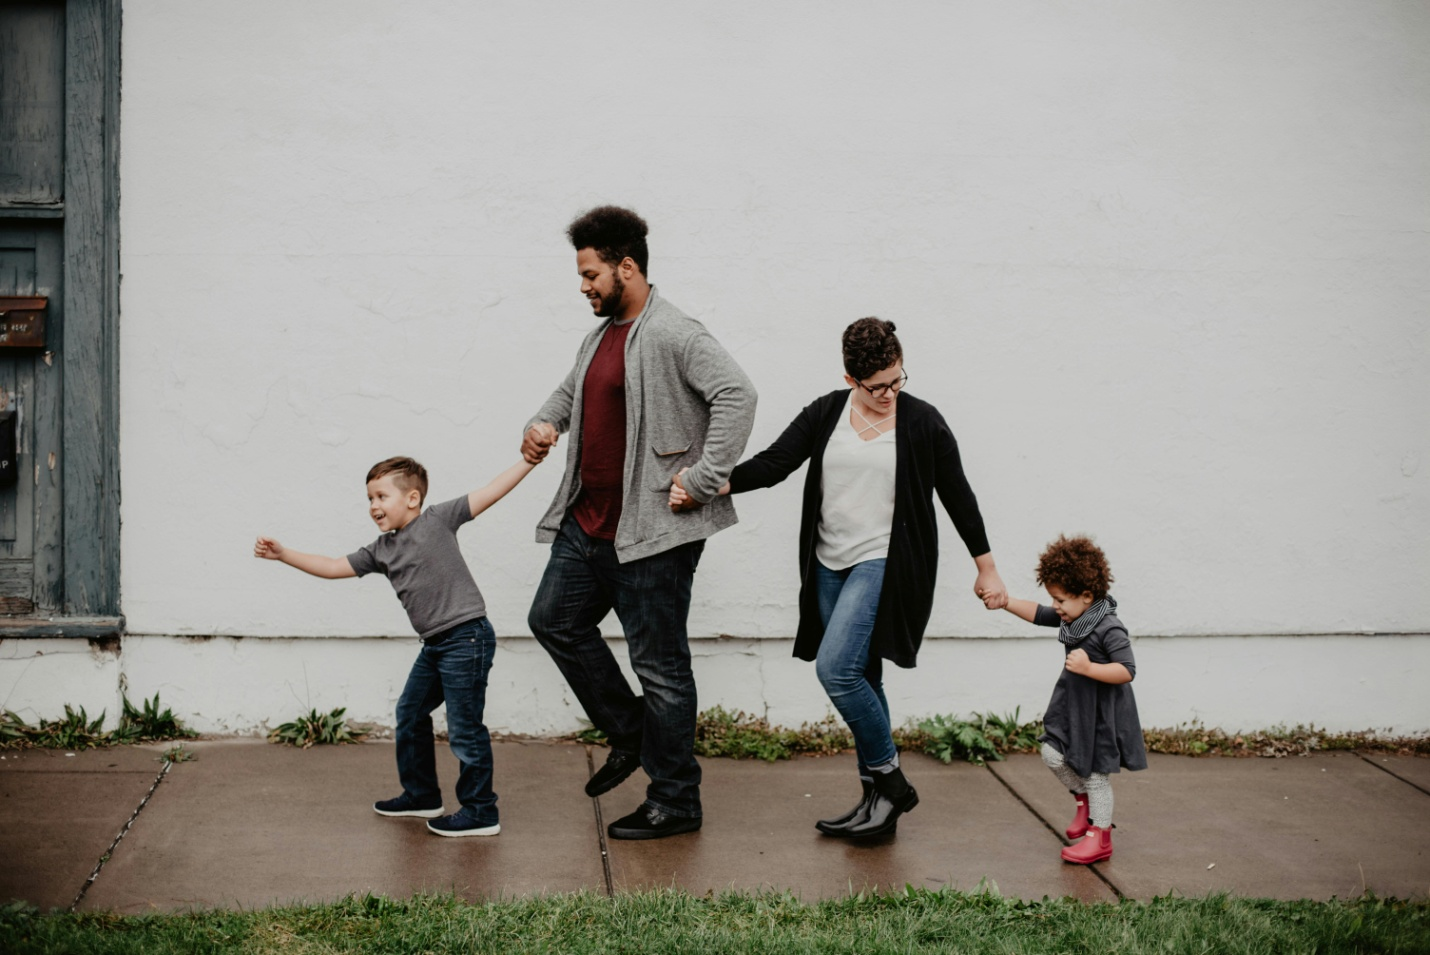 Parents walking with their kids by https://www.pexels.com/photo/family-of-four-walking-at-the-street-2253879/